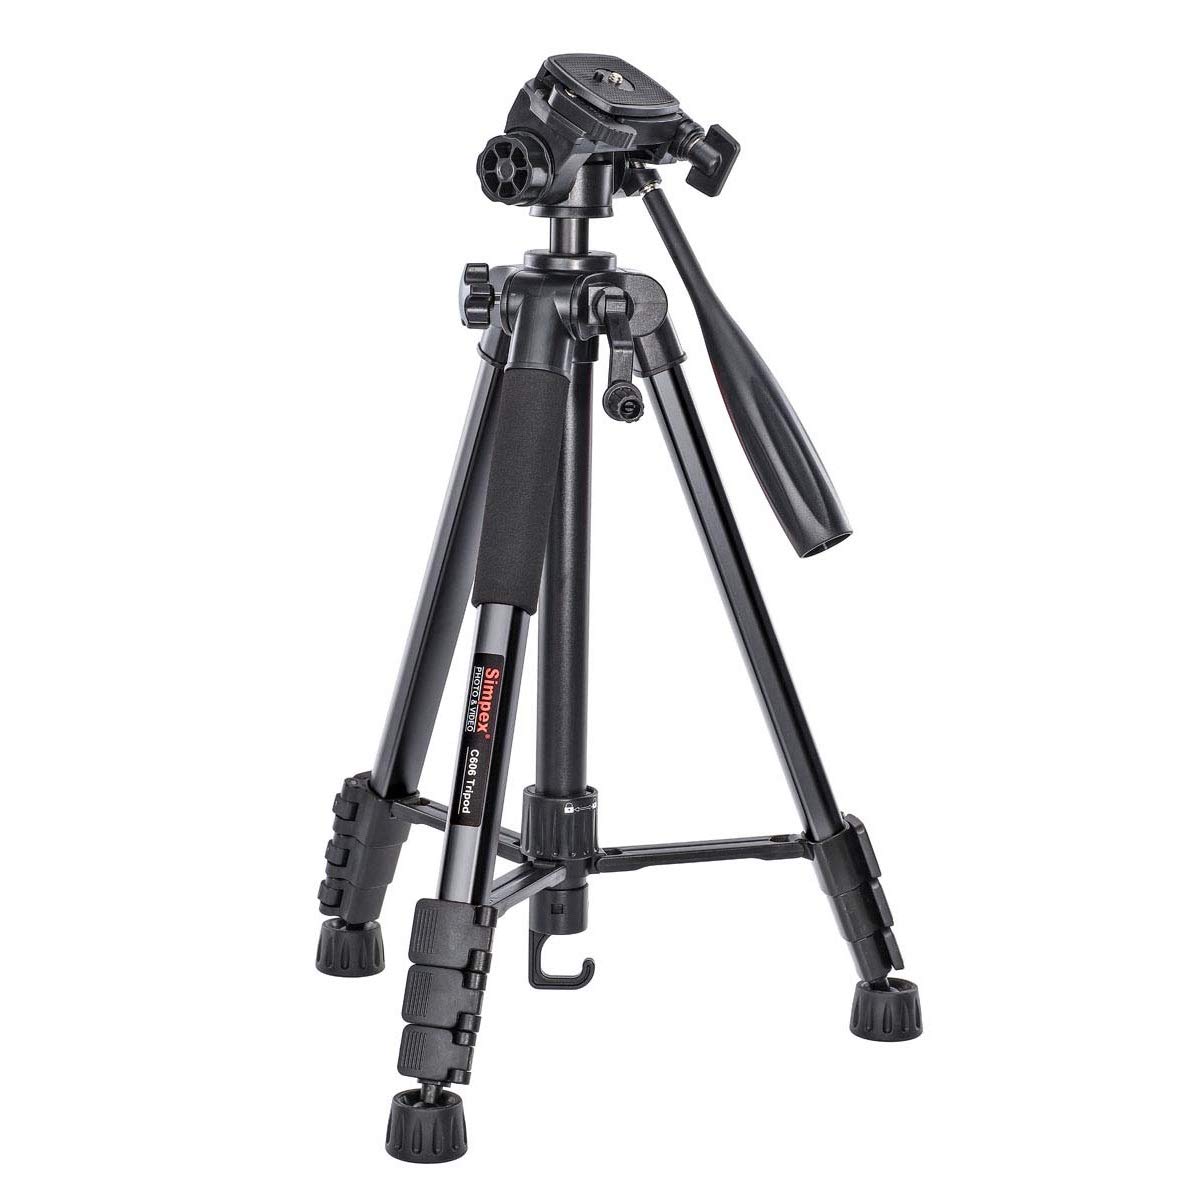 Simpex C-606 Professional Tripod In Black With Carry Bag - Portable And Versatile Photography Equipment.